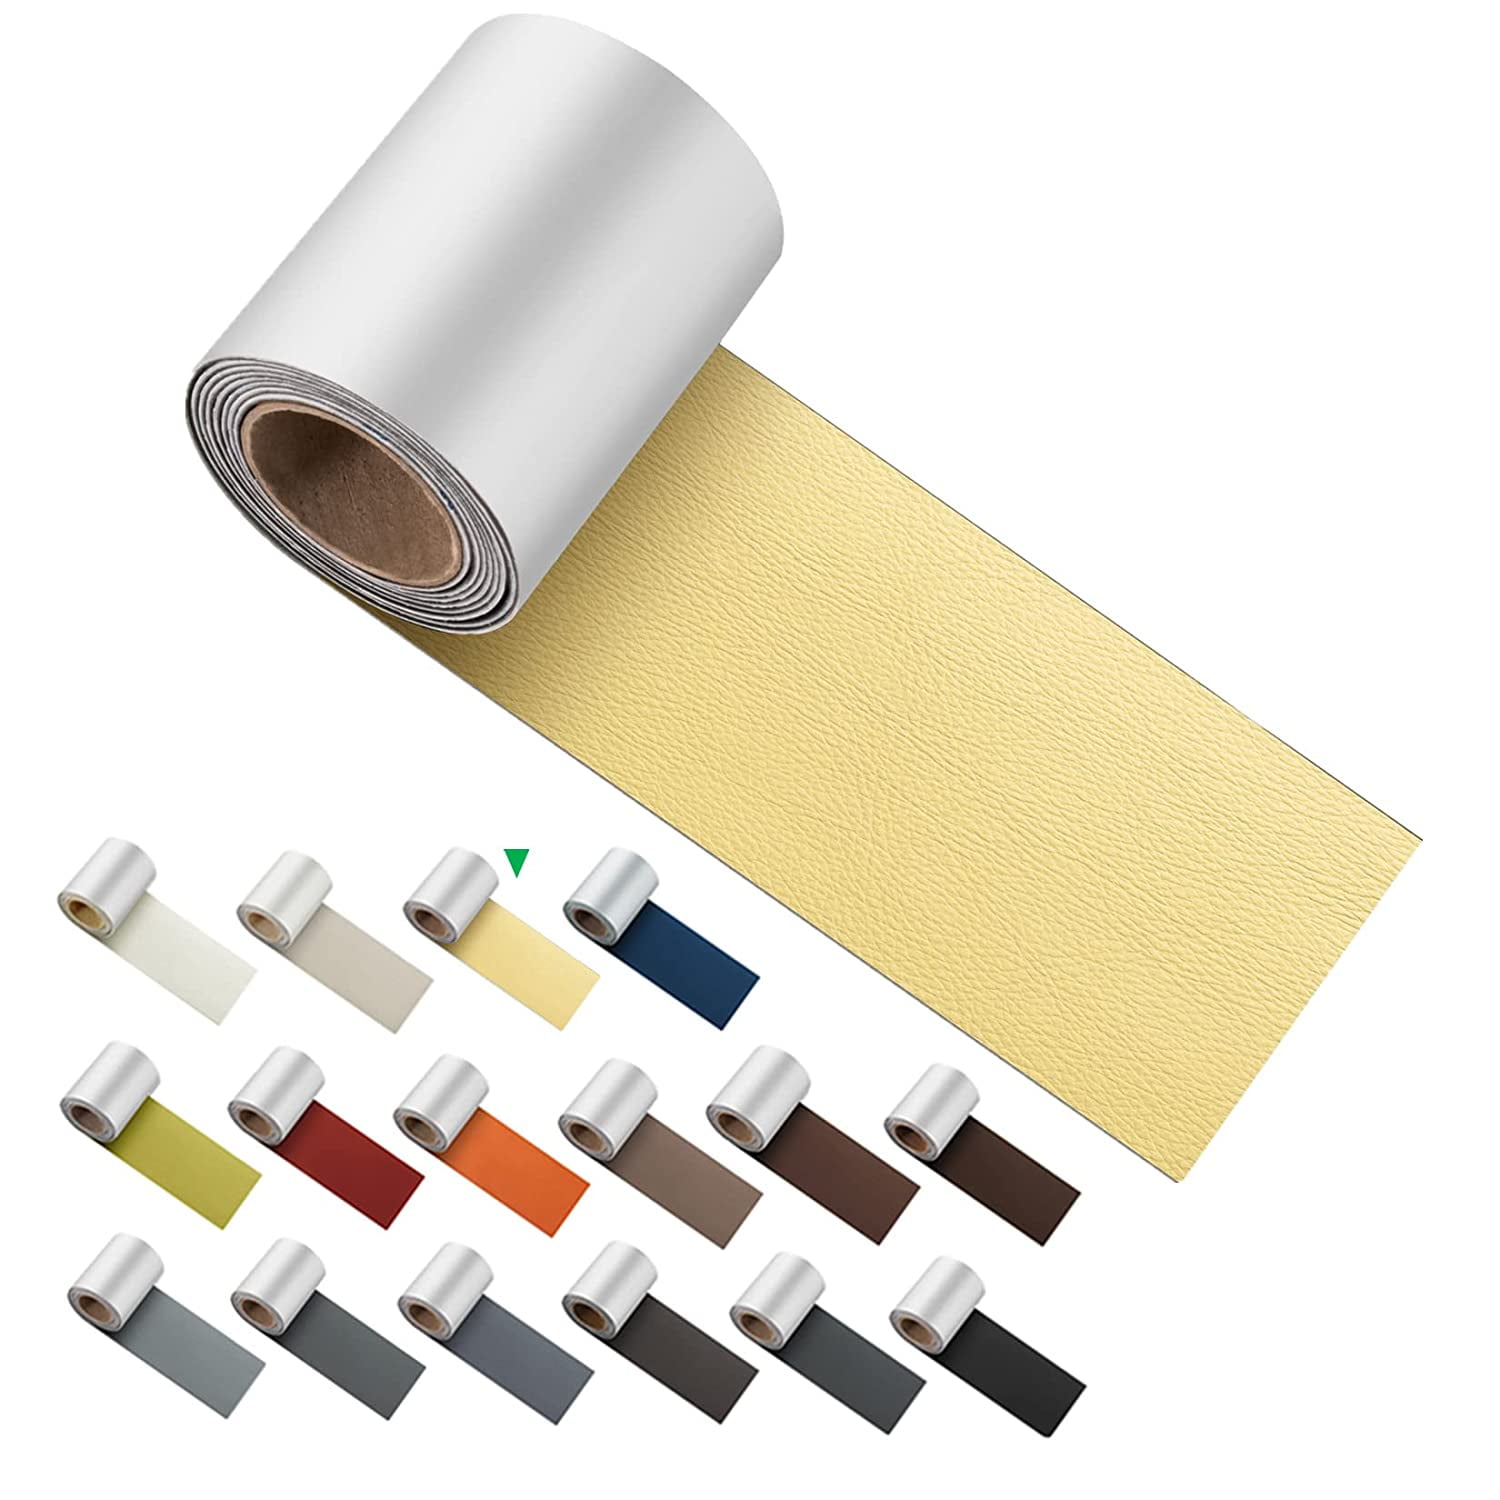 Leather and Vinyl Repair Tape 3x60 inch, Strong Adhesion Backing Self  Adhesive Vinyl and Leather Repair Kit for Car Seat, Couch, Furniture,  Jacket. Bonded Leather Repair Roll 